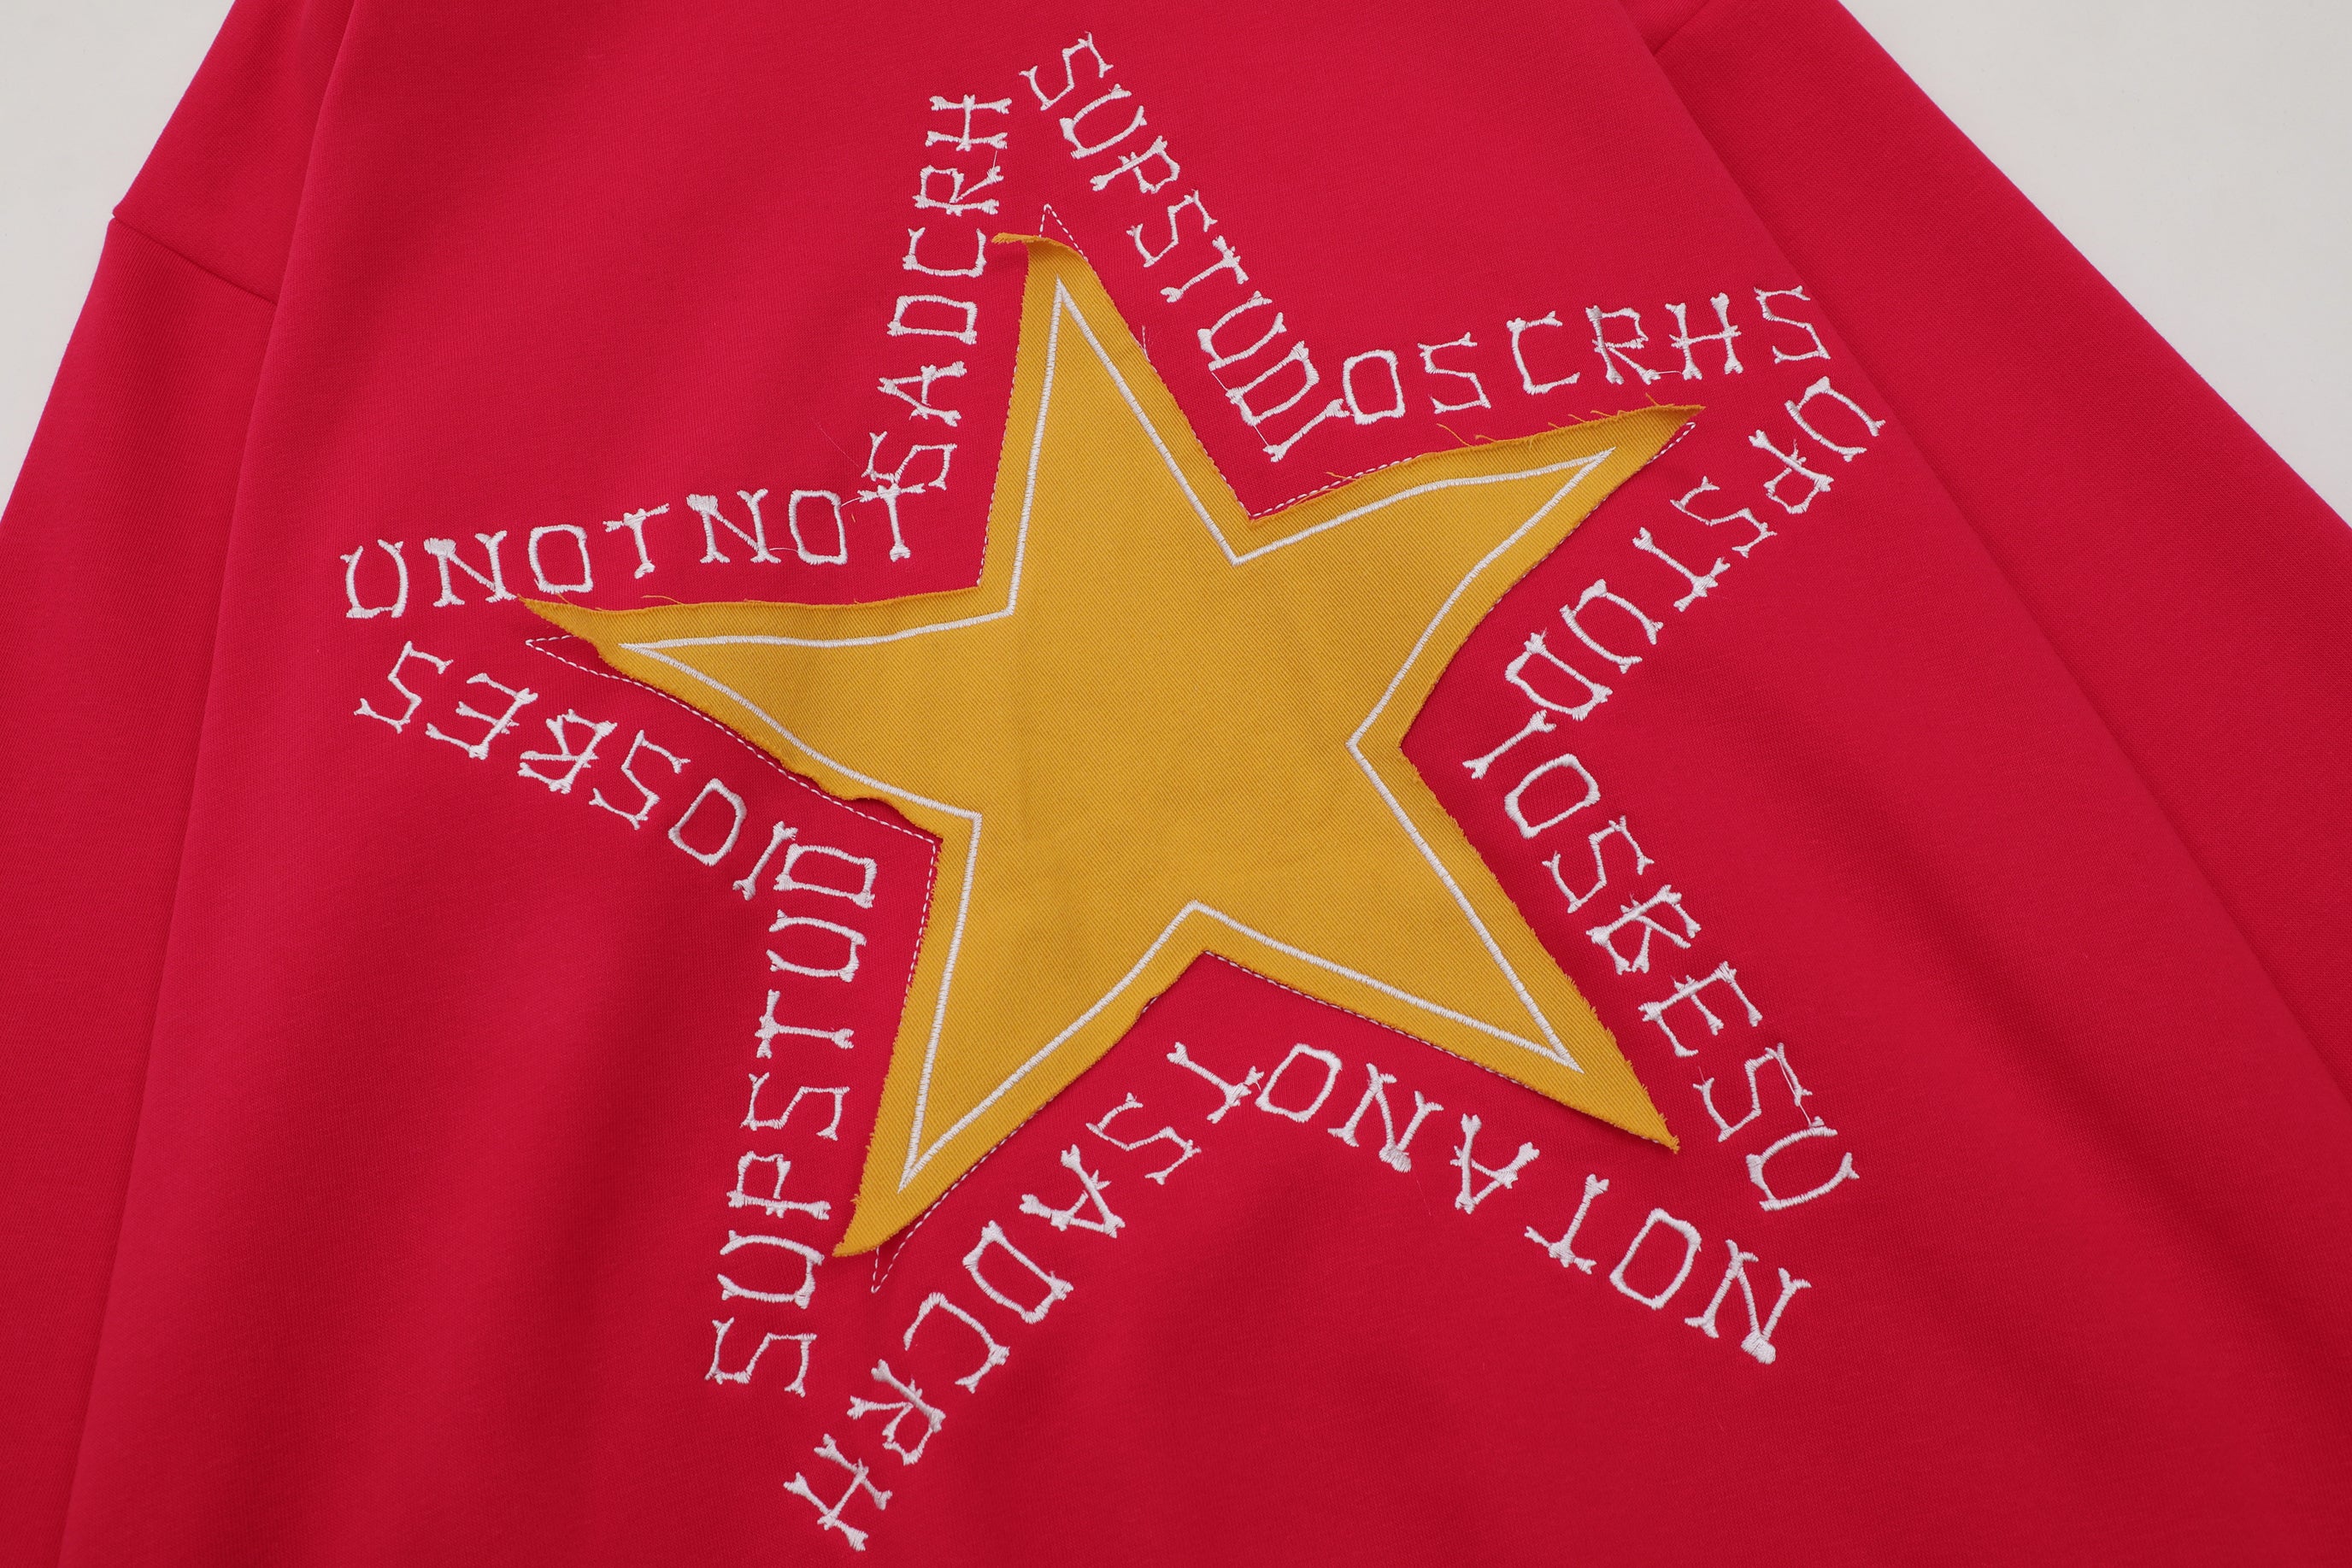 Faire Echo “Star” Patchwork  Embroidery Hoodie